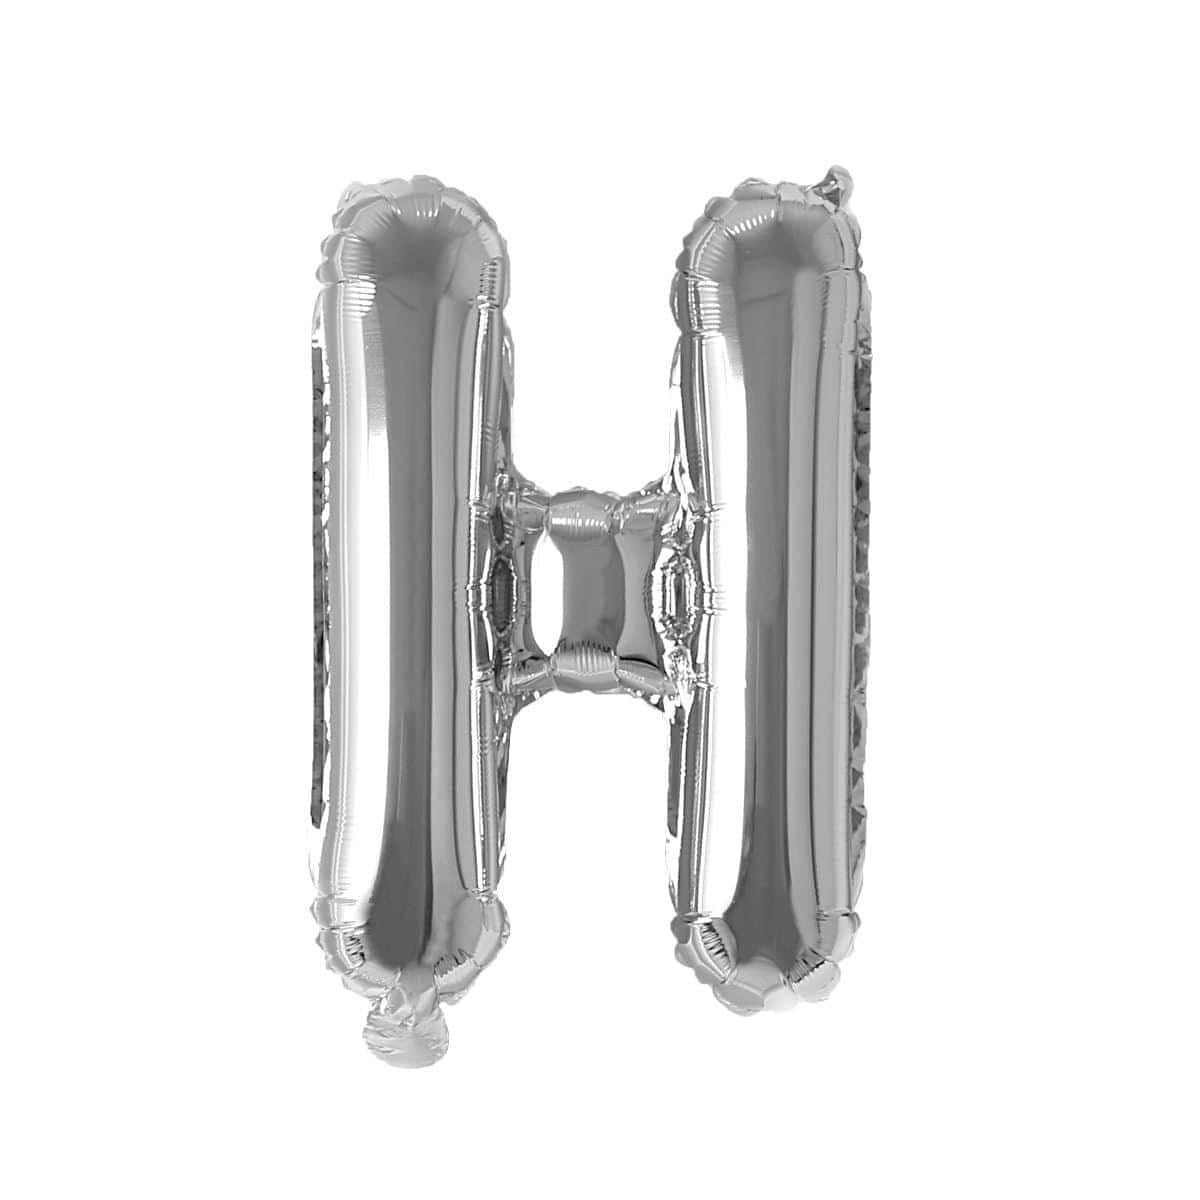 Buy Balloons Silver Letter H Foil Balloon, 16 Inches sold at Party Expert